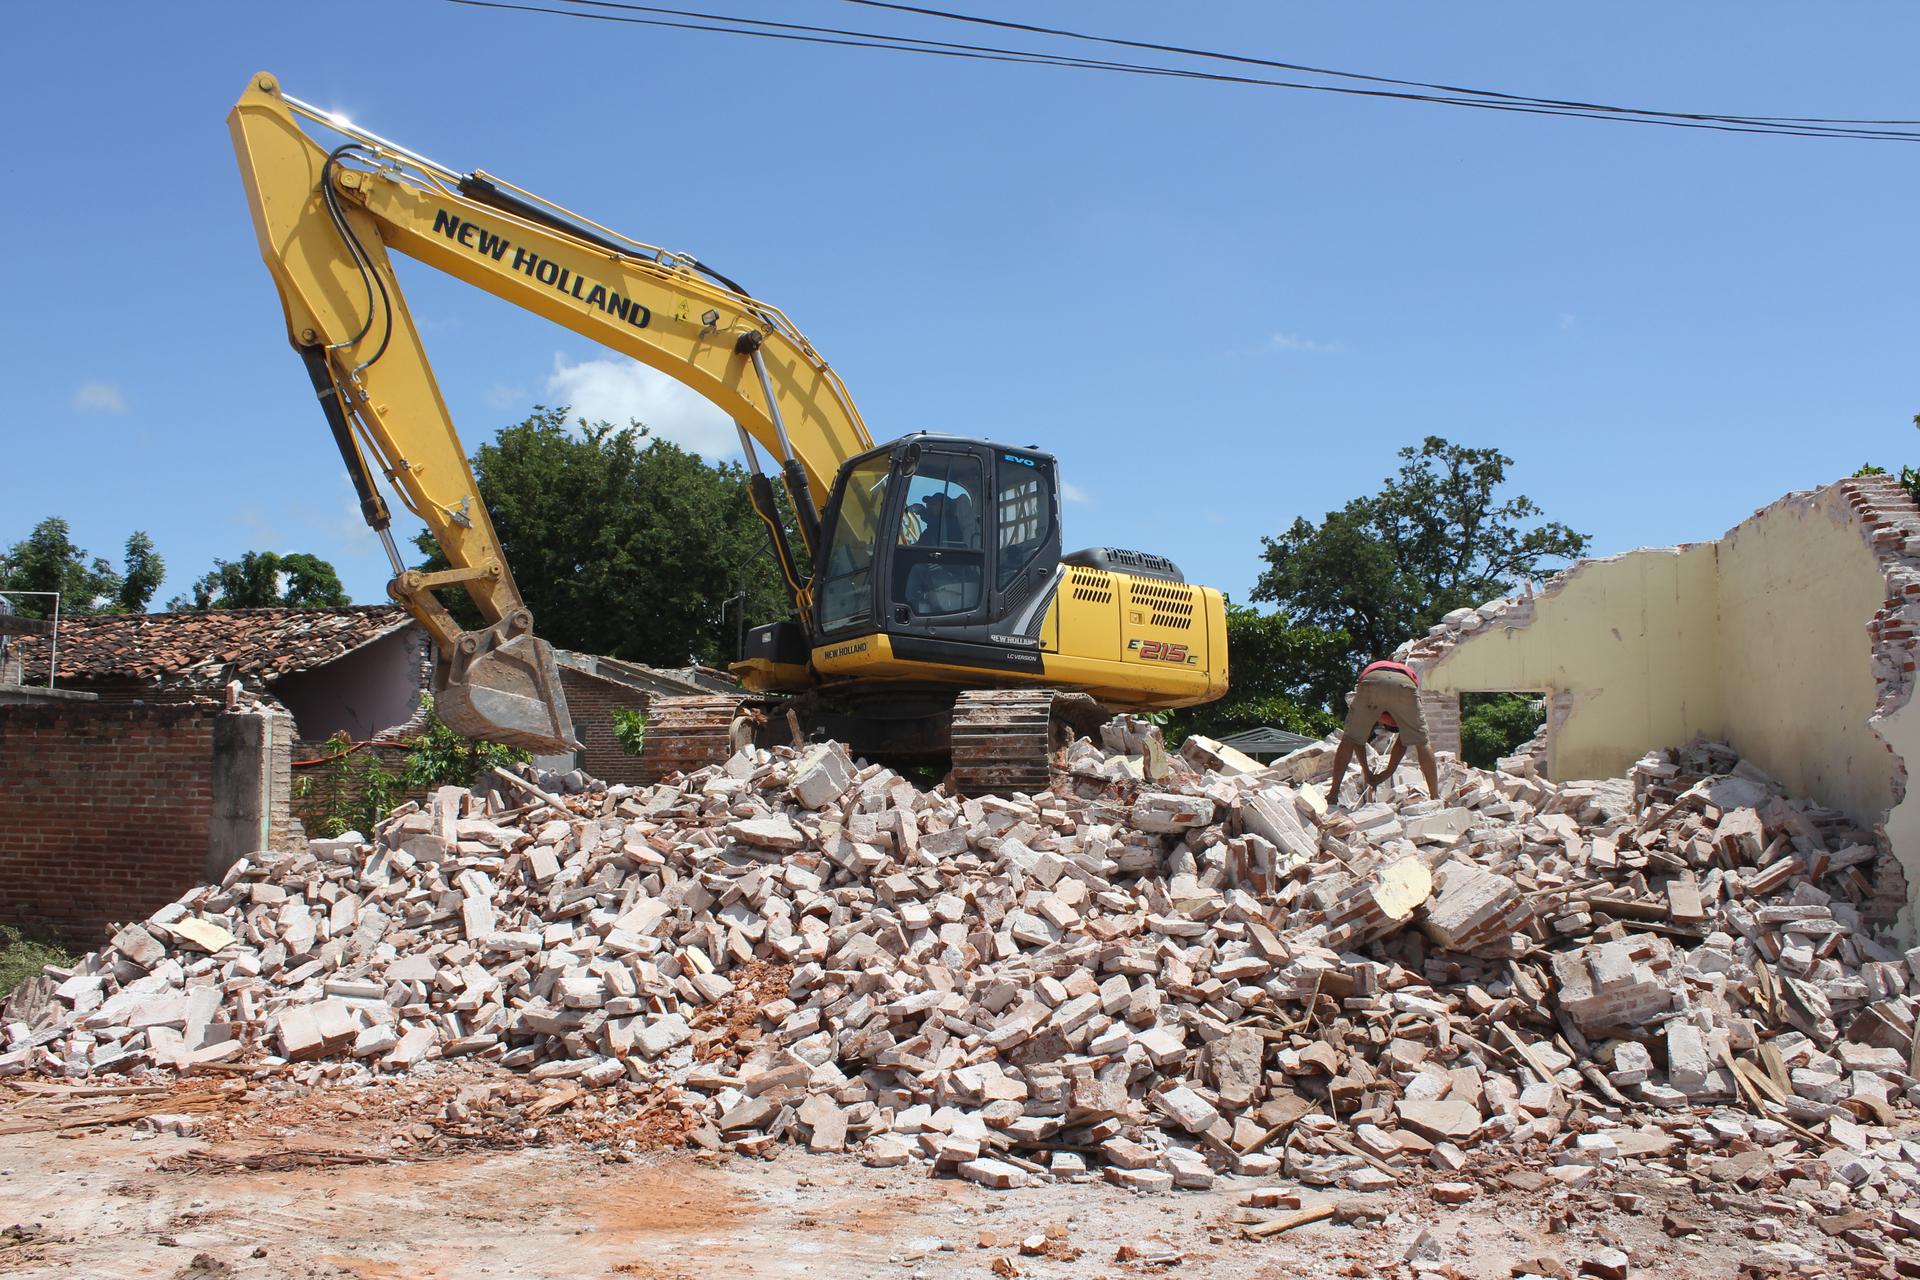 Demolition crews have been knocking down homes by the hundreds across Oaxaca's Isthmus region. Many homeowner say they feel rushed into the tear-downs.